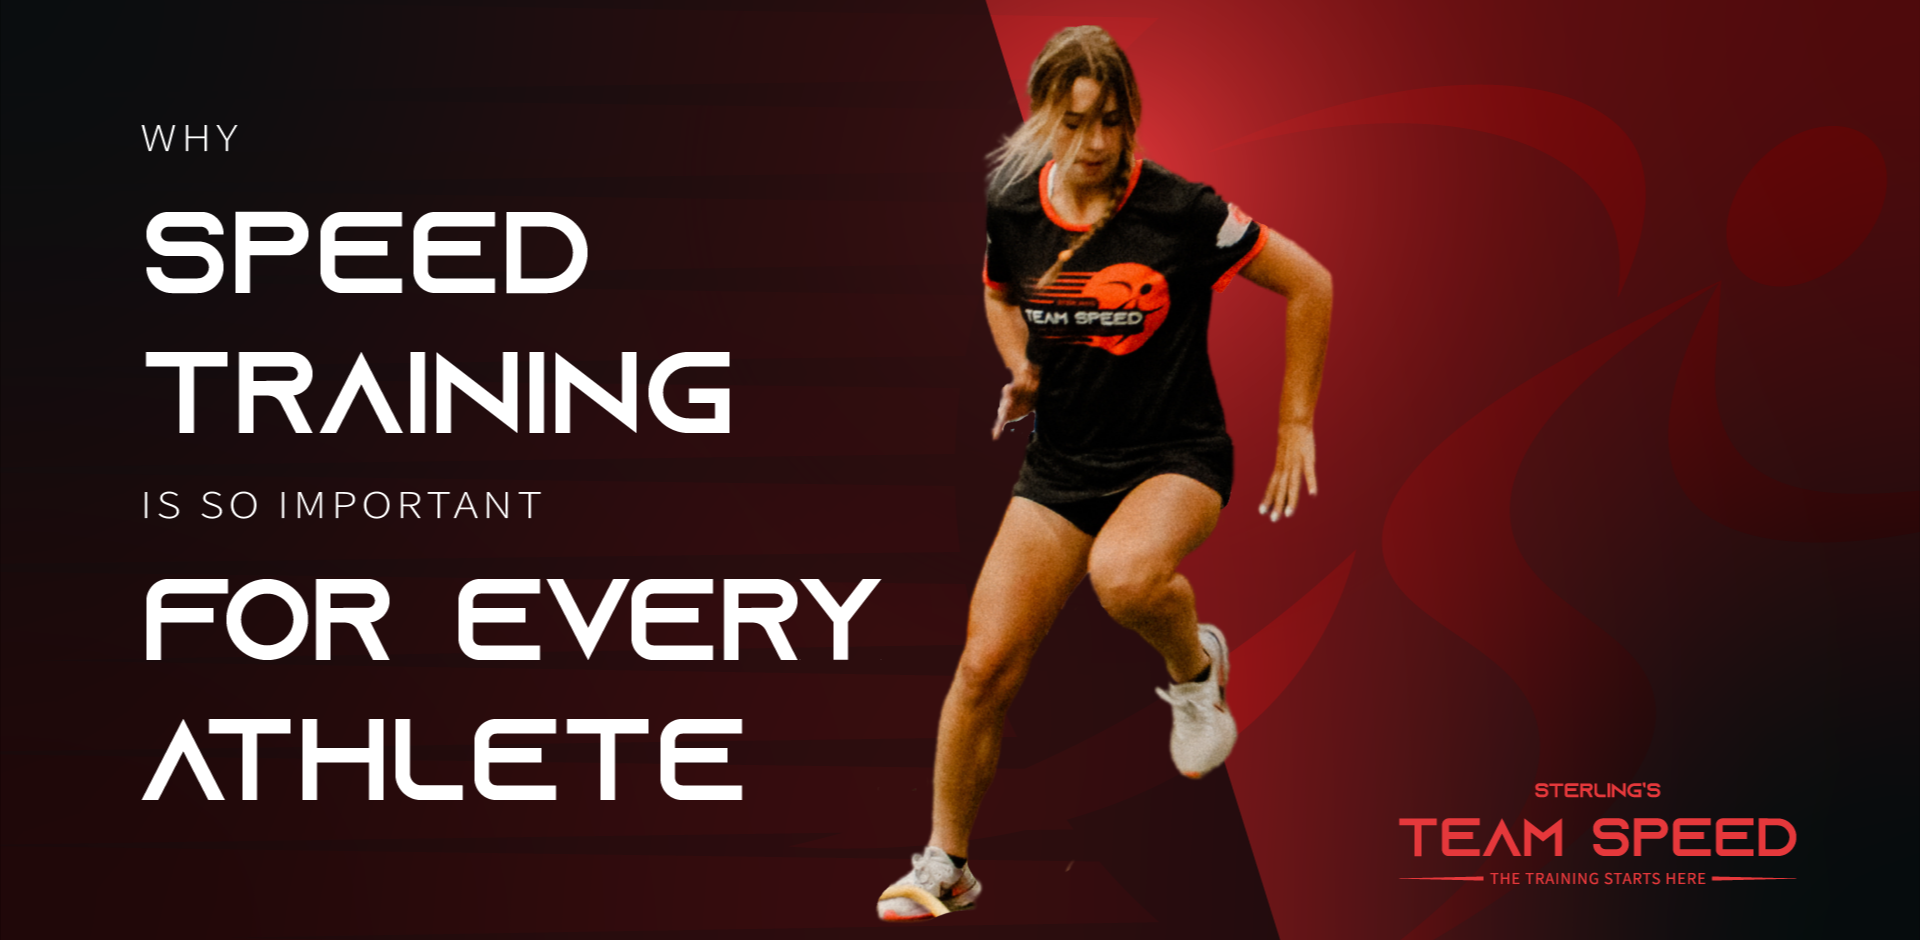 
Why Speed Training is Important for Every Athlete